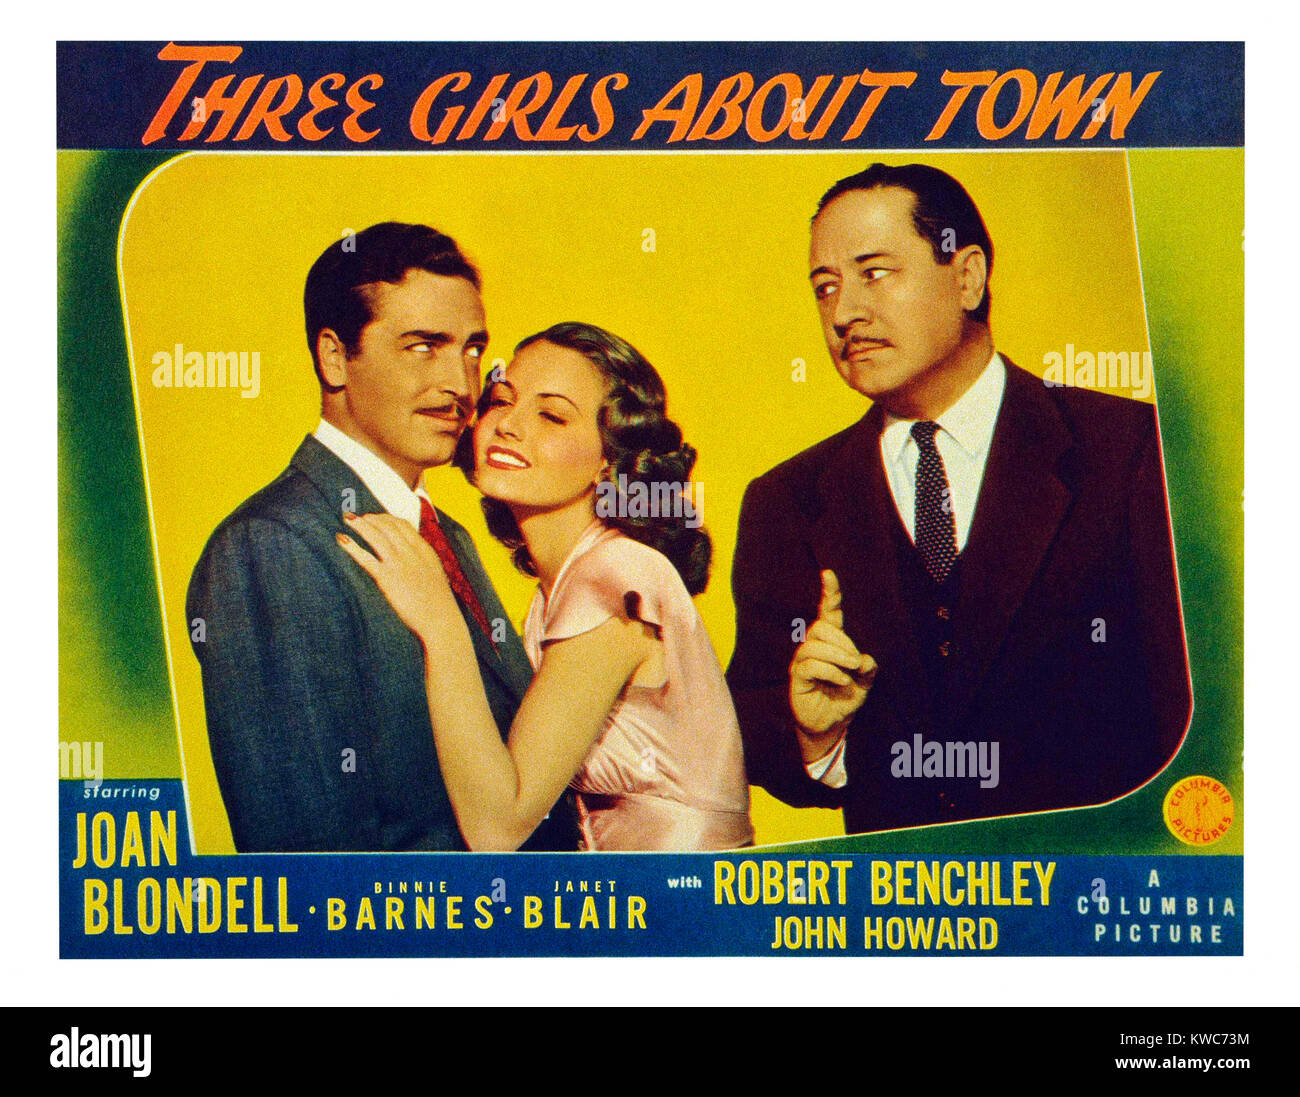 THREE GIRLS ABOUT TOWN, US lobbycard, from left: John Howard, Janet Blair, Robert Benchley, 1941 Stock Photo